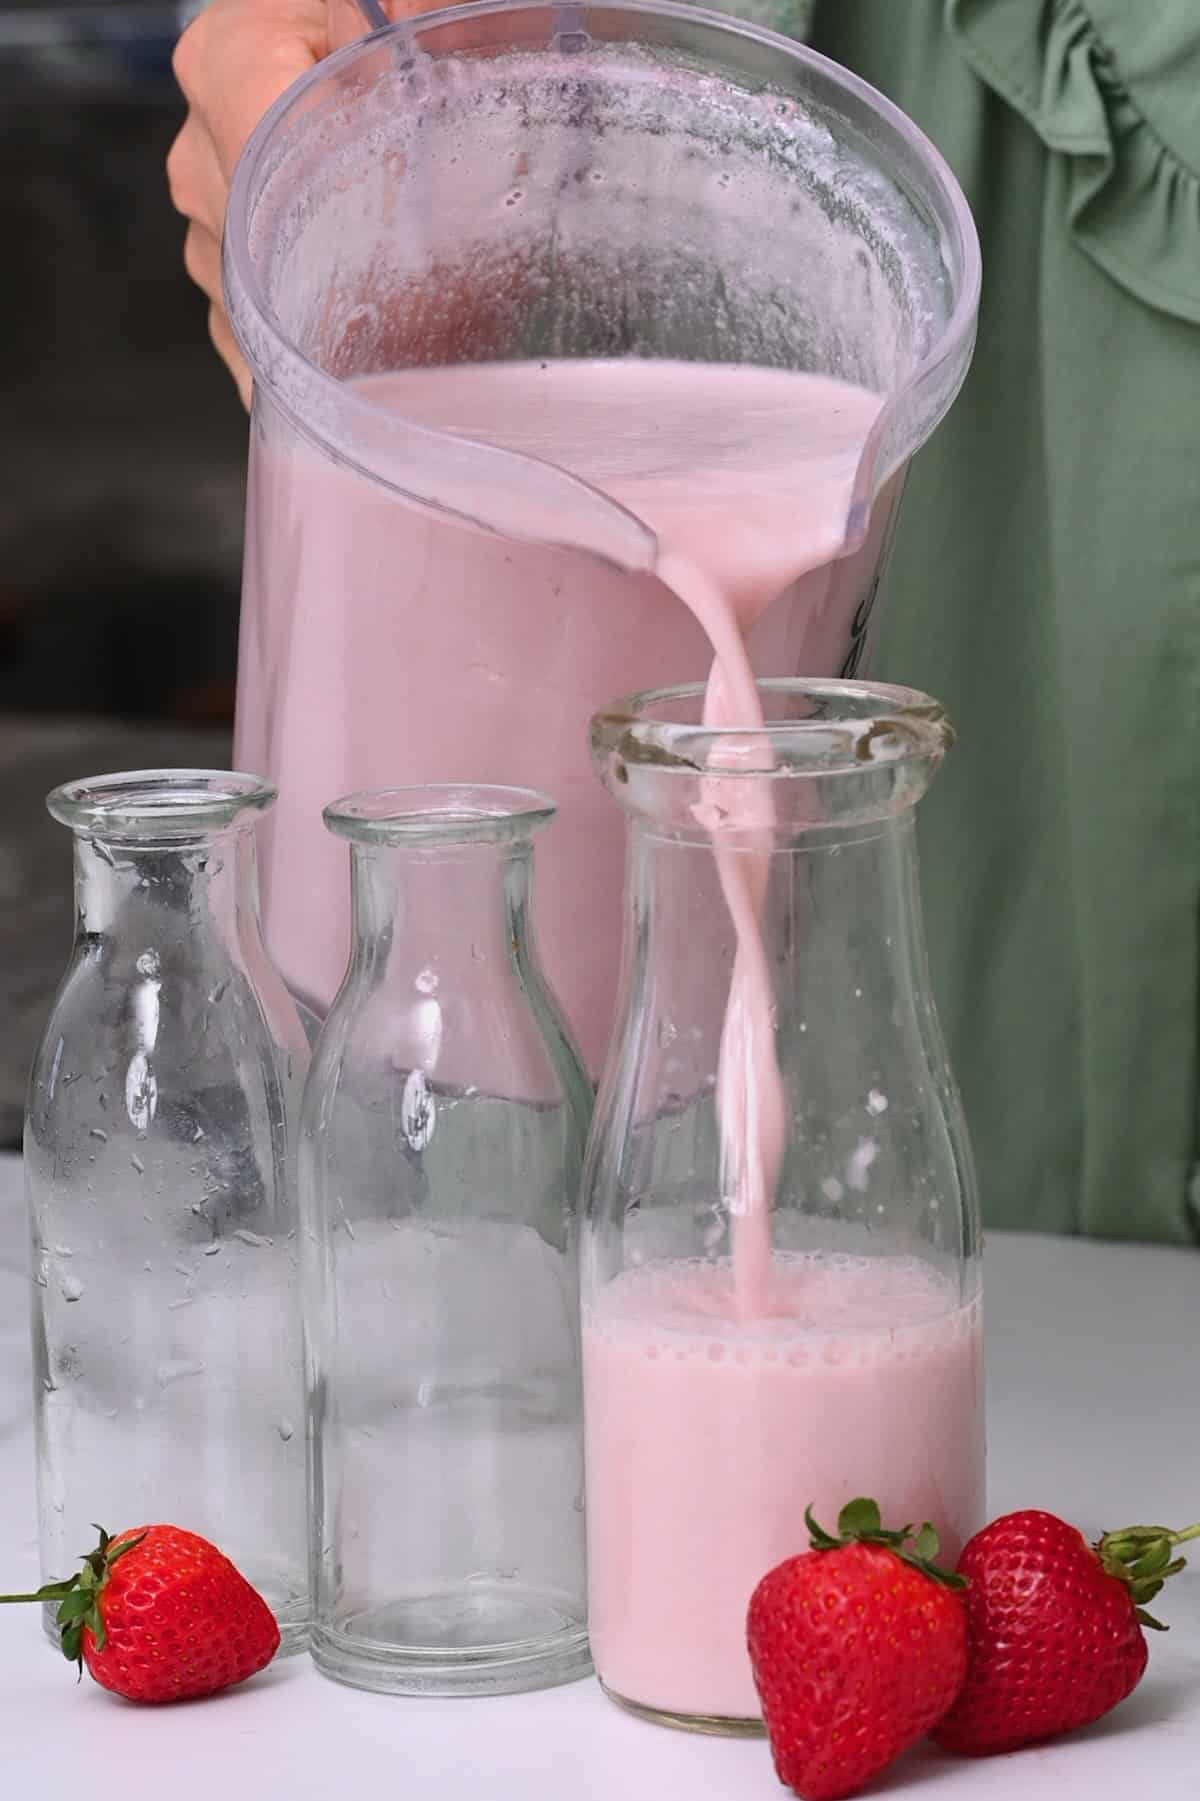 Pouring strawberry milk from a blender to a bottle